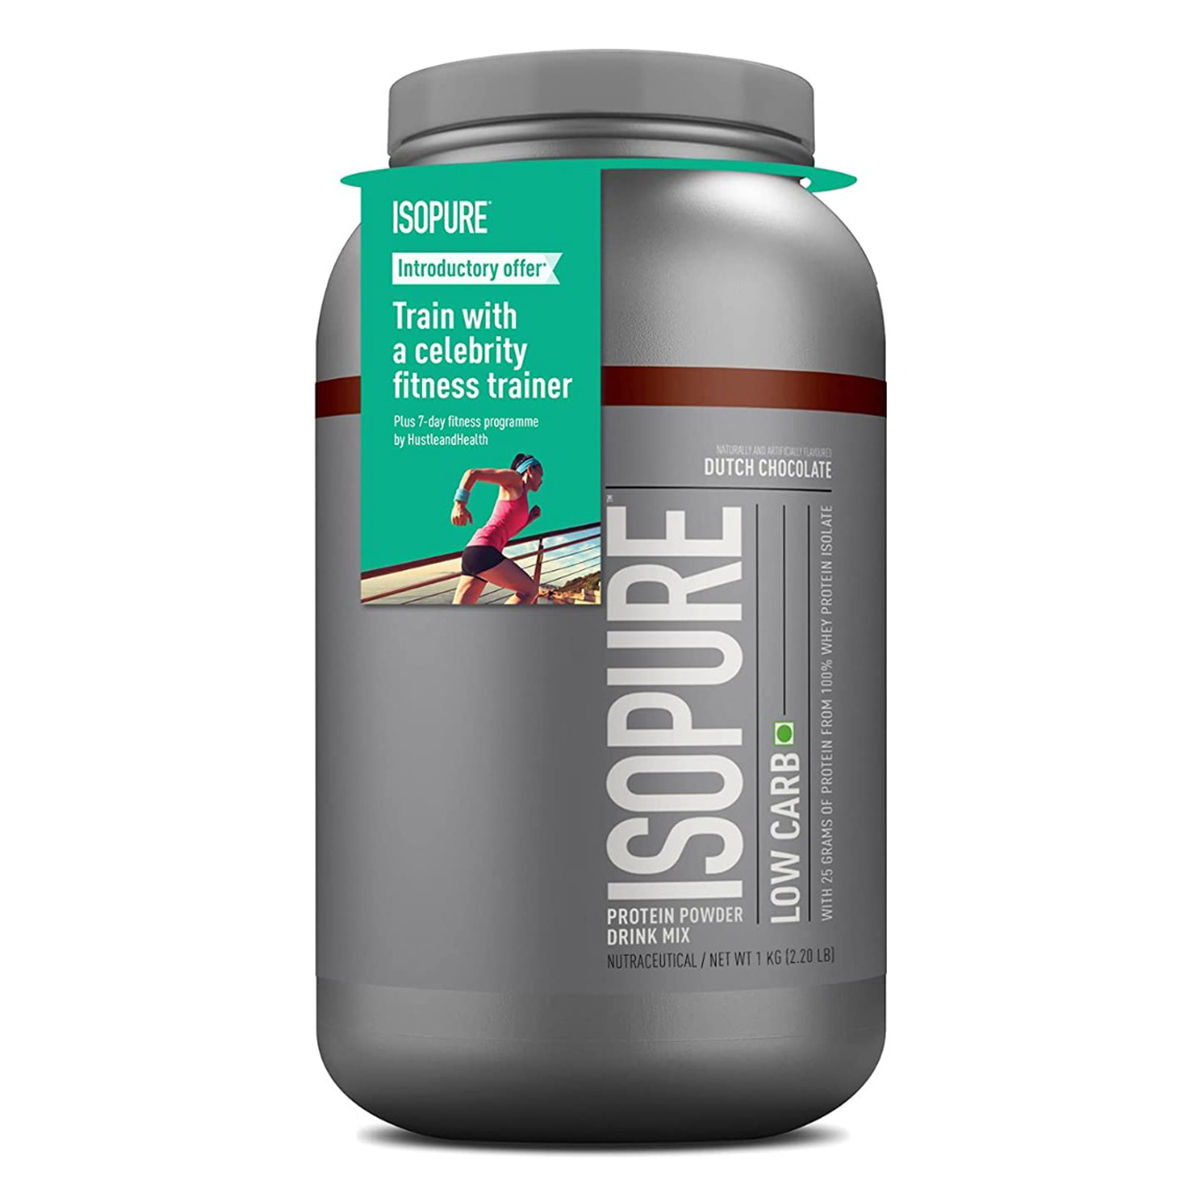 Buy Isopure Low Carb 100% Whey Protein Isolate Dutch Chocolate Flavour Powder, 2.20 lb Online